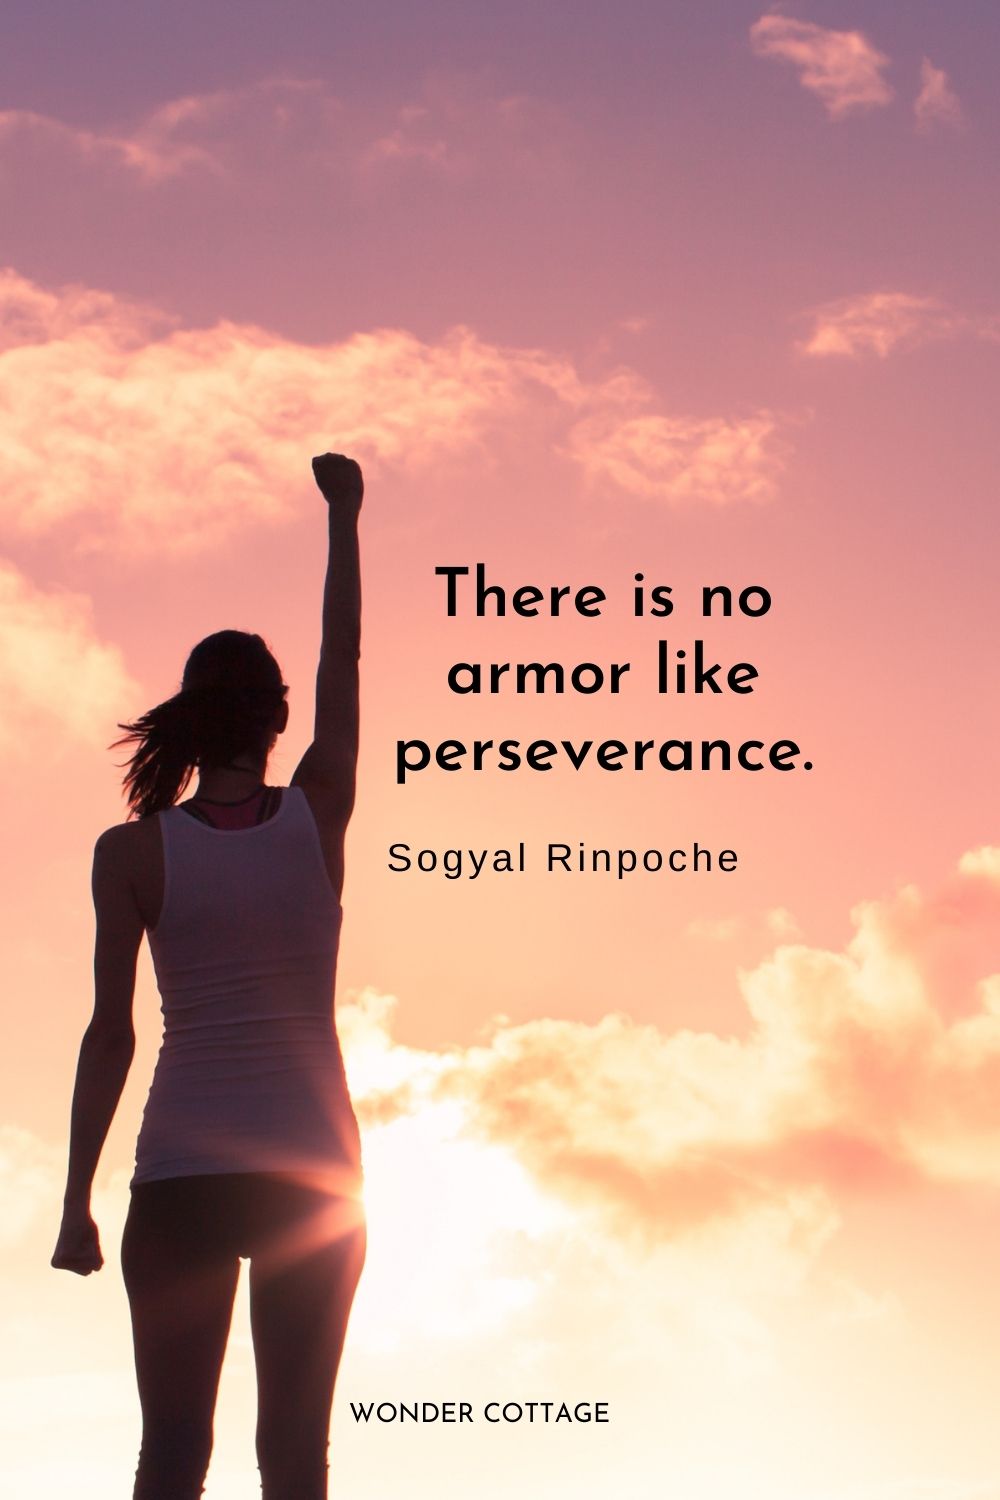 There is no armor like perseverance.  Sogyal Rinpoche